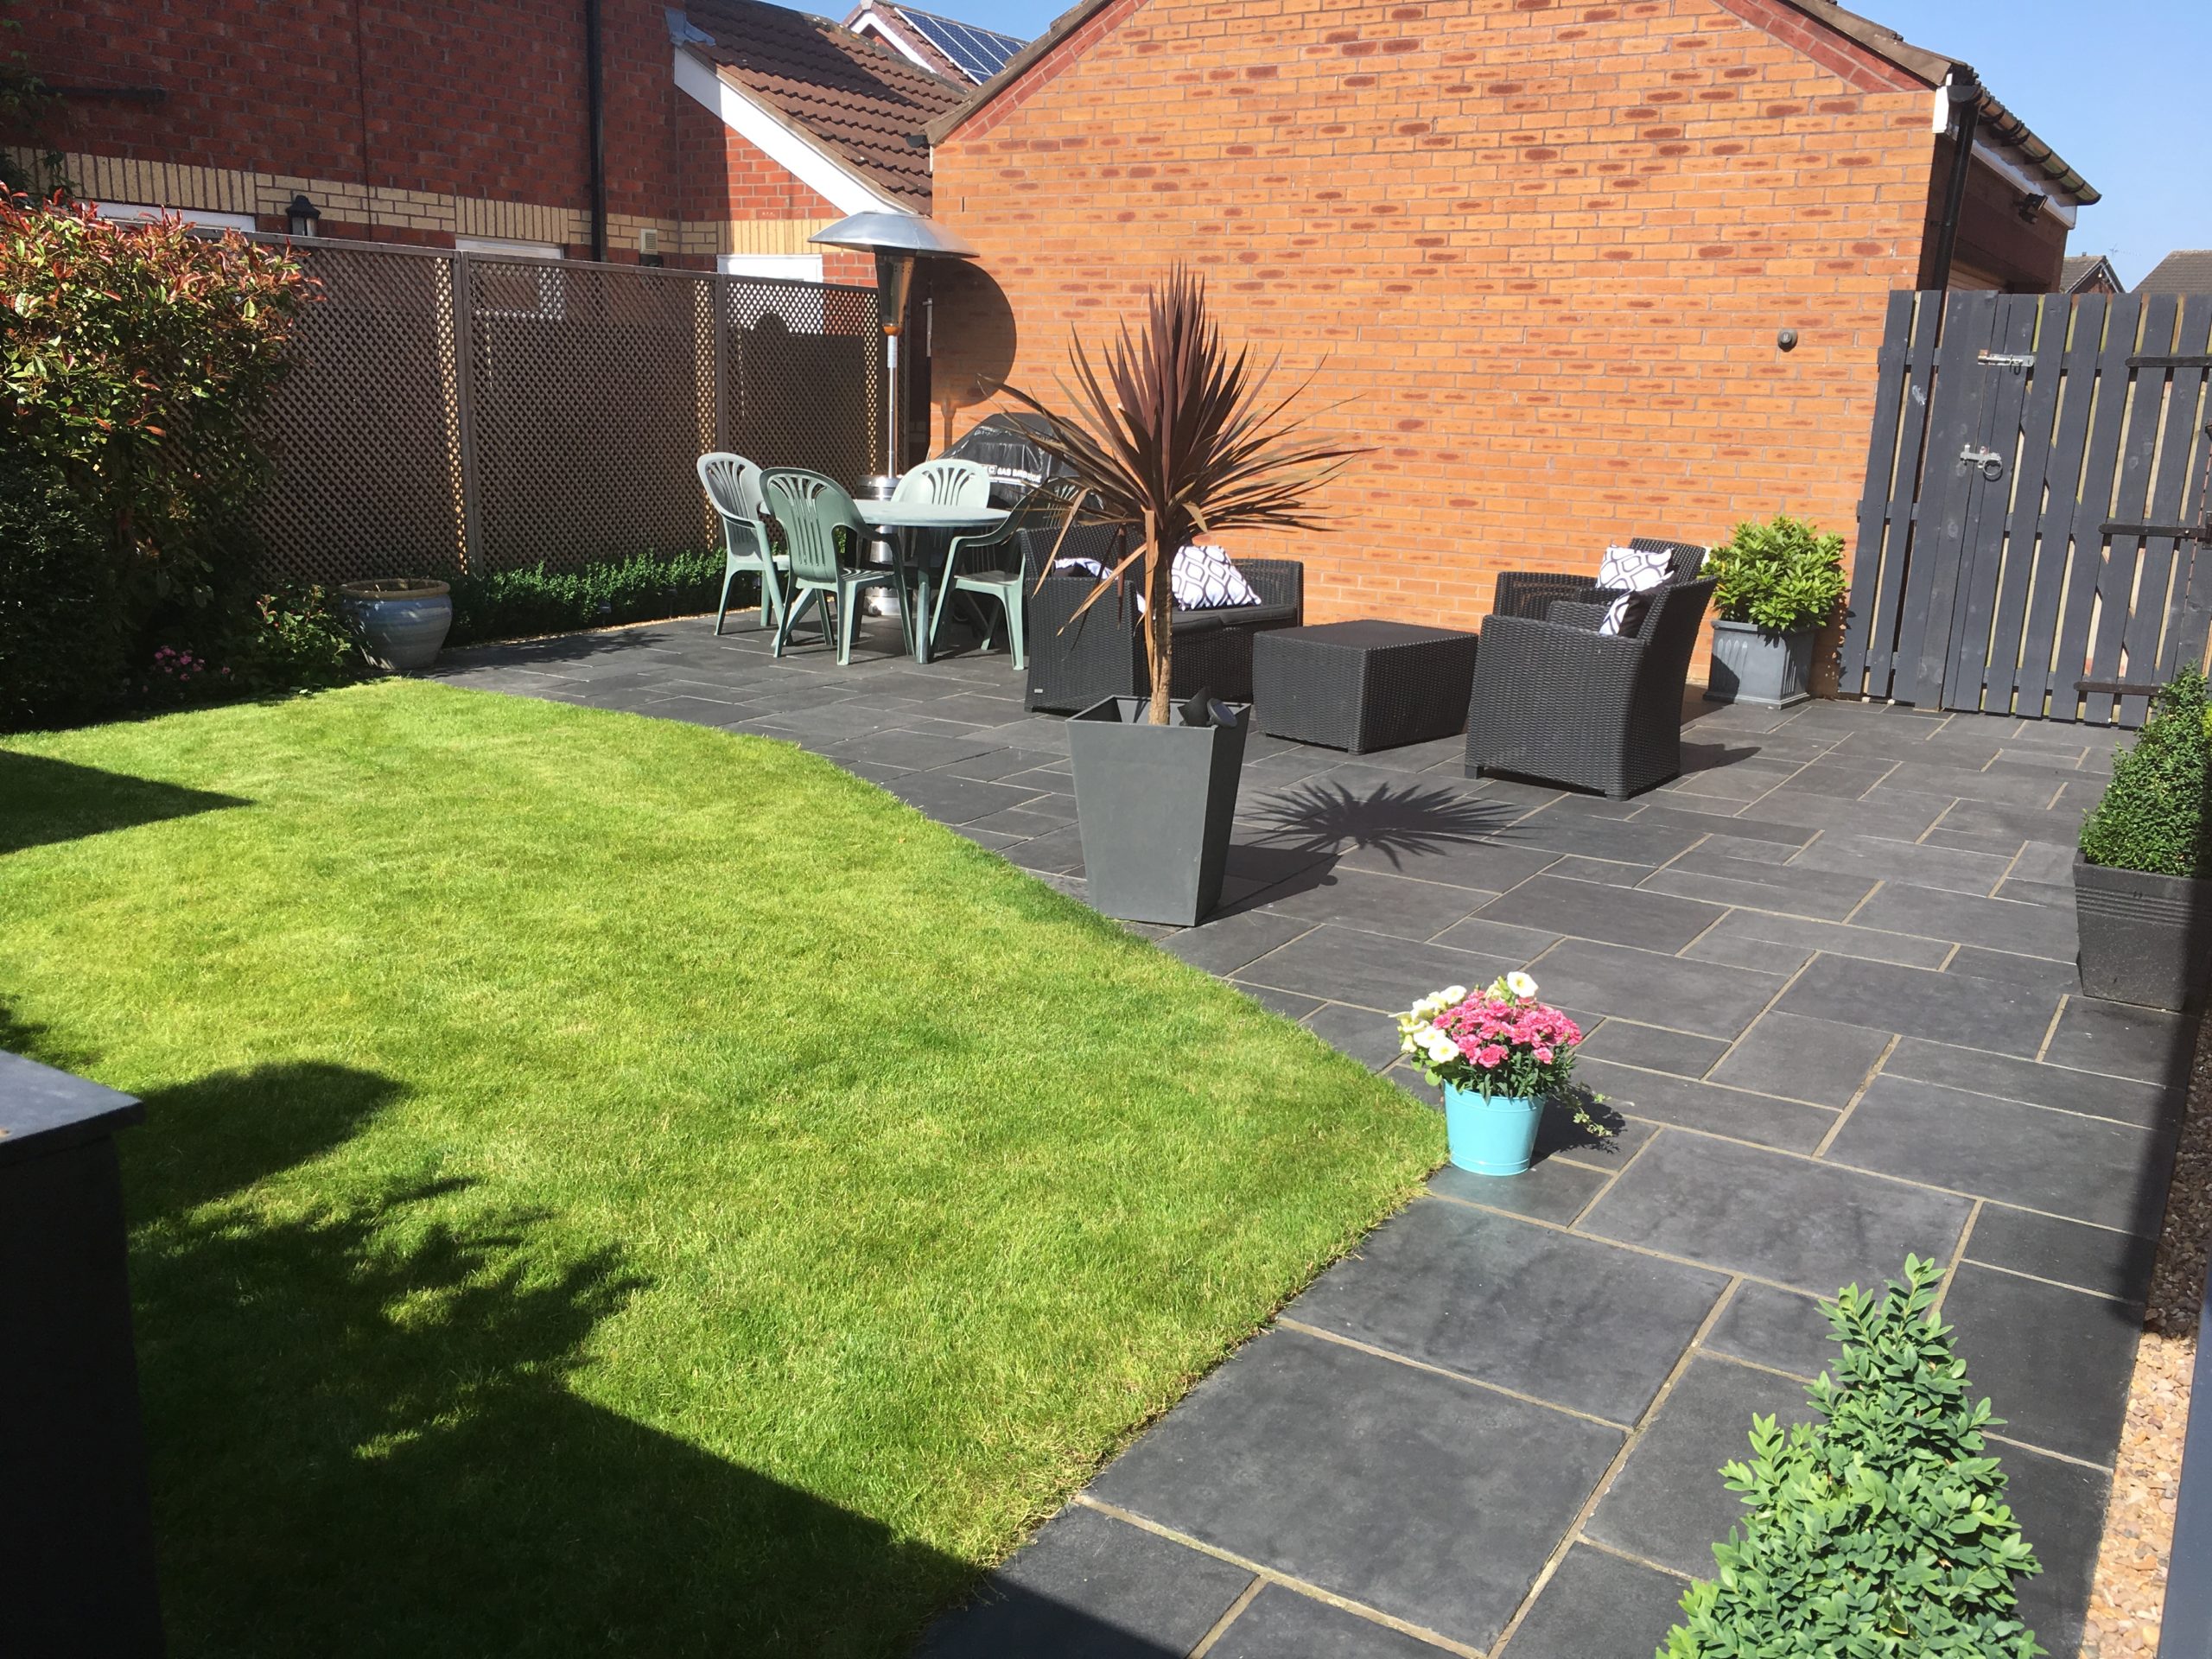 Lawn furniture and garden in front of a single storey extension